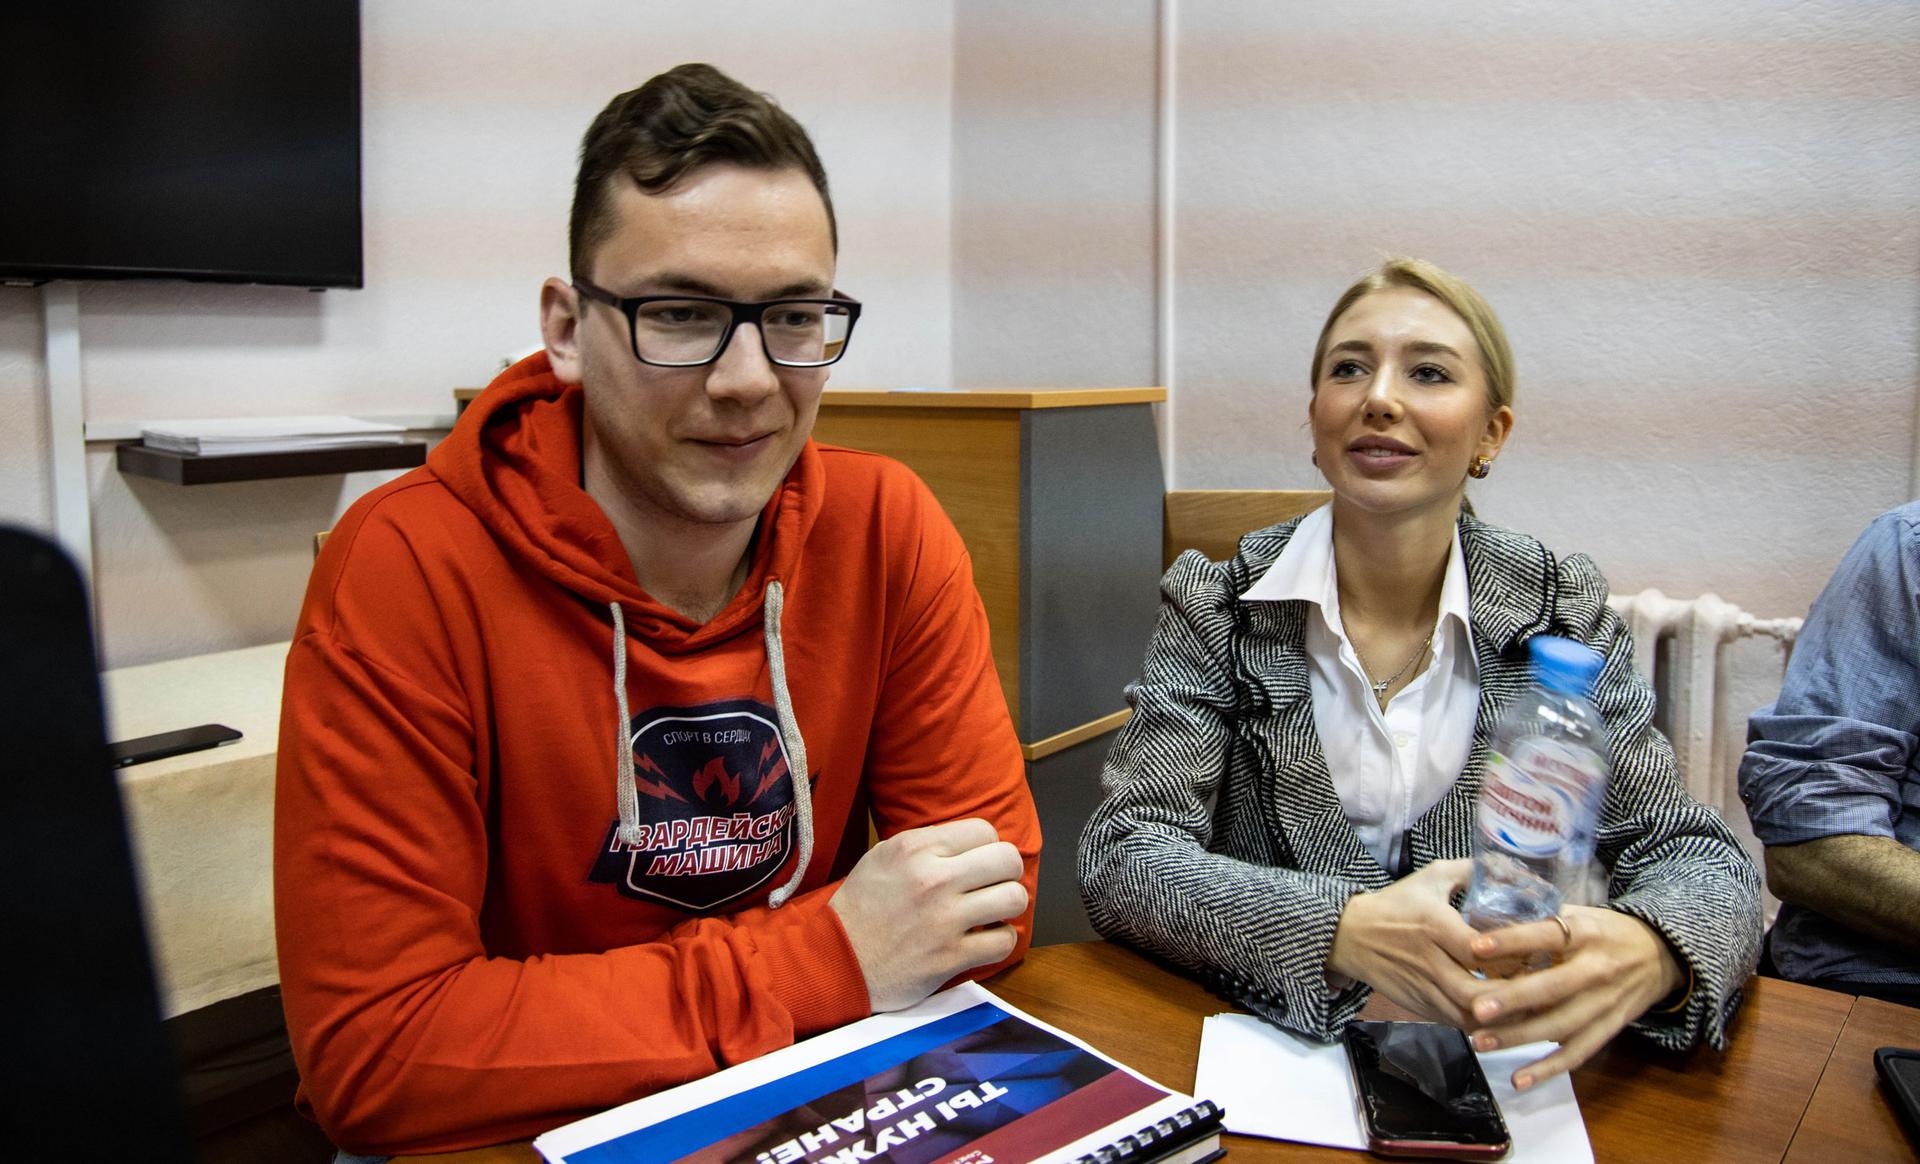 Two young people sit at a table. One young man is wearing an orange hoodie with Russian words on it.